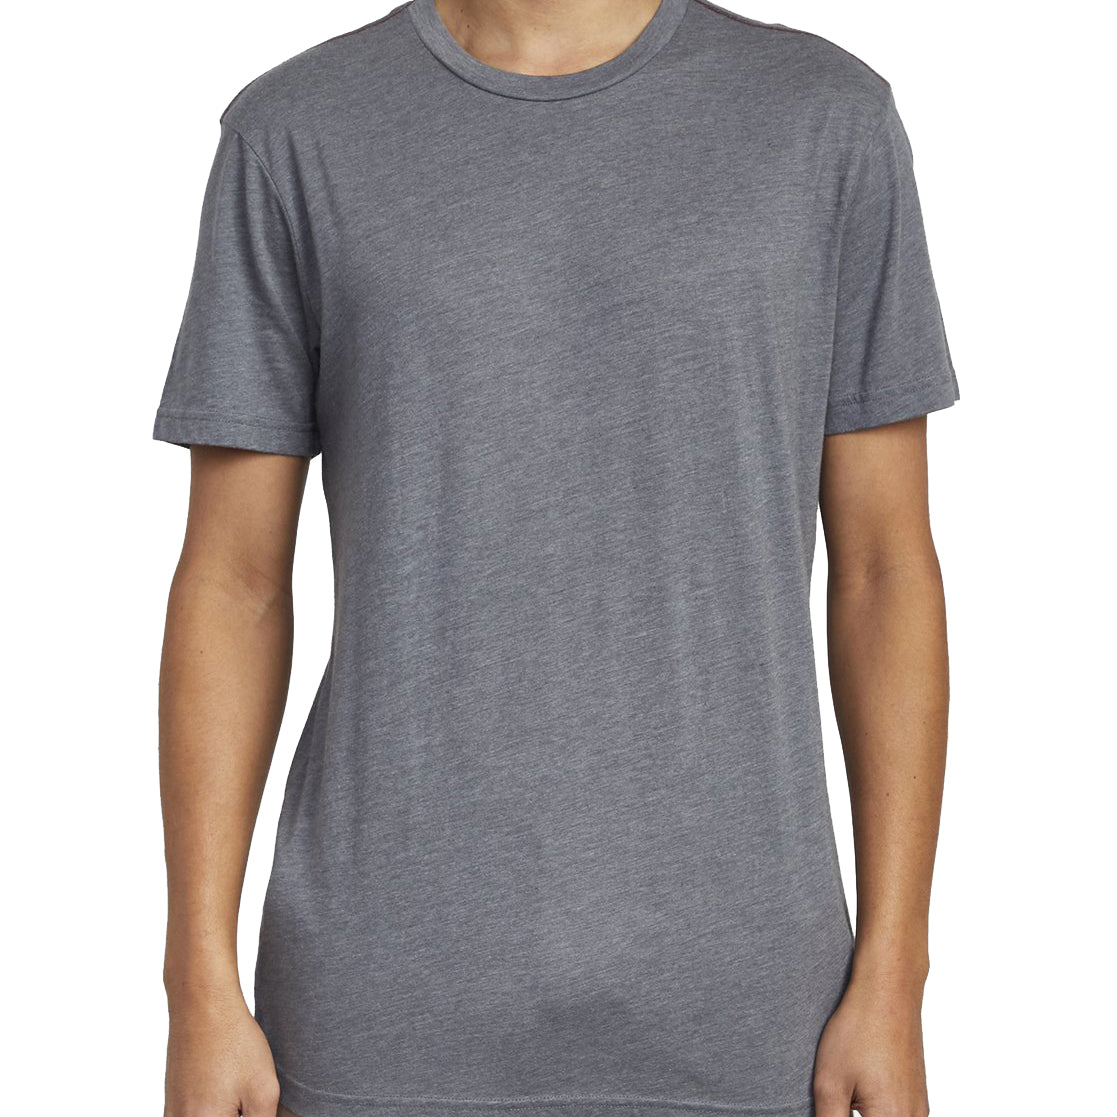 RVCA Solo Label SS Tee GBL-GreyBlue S